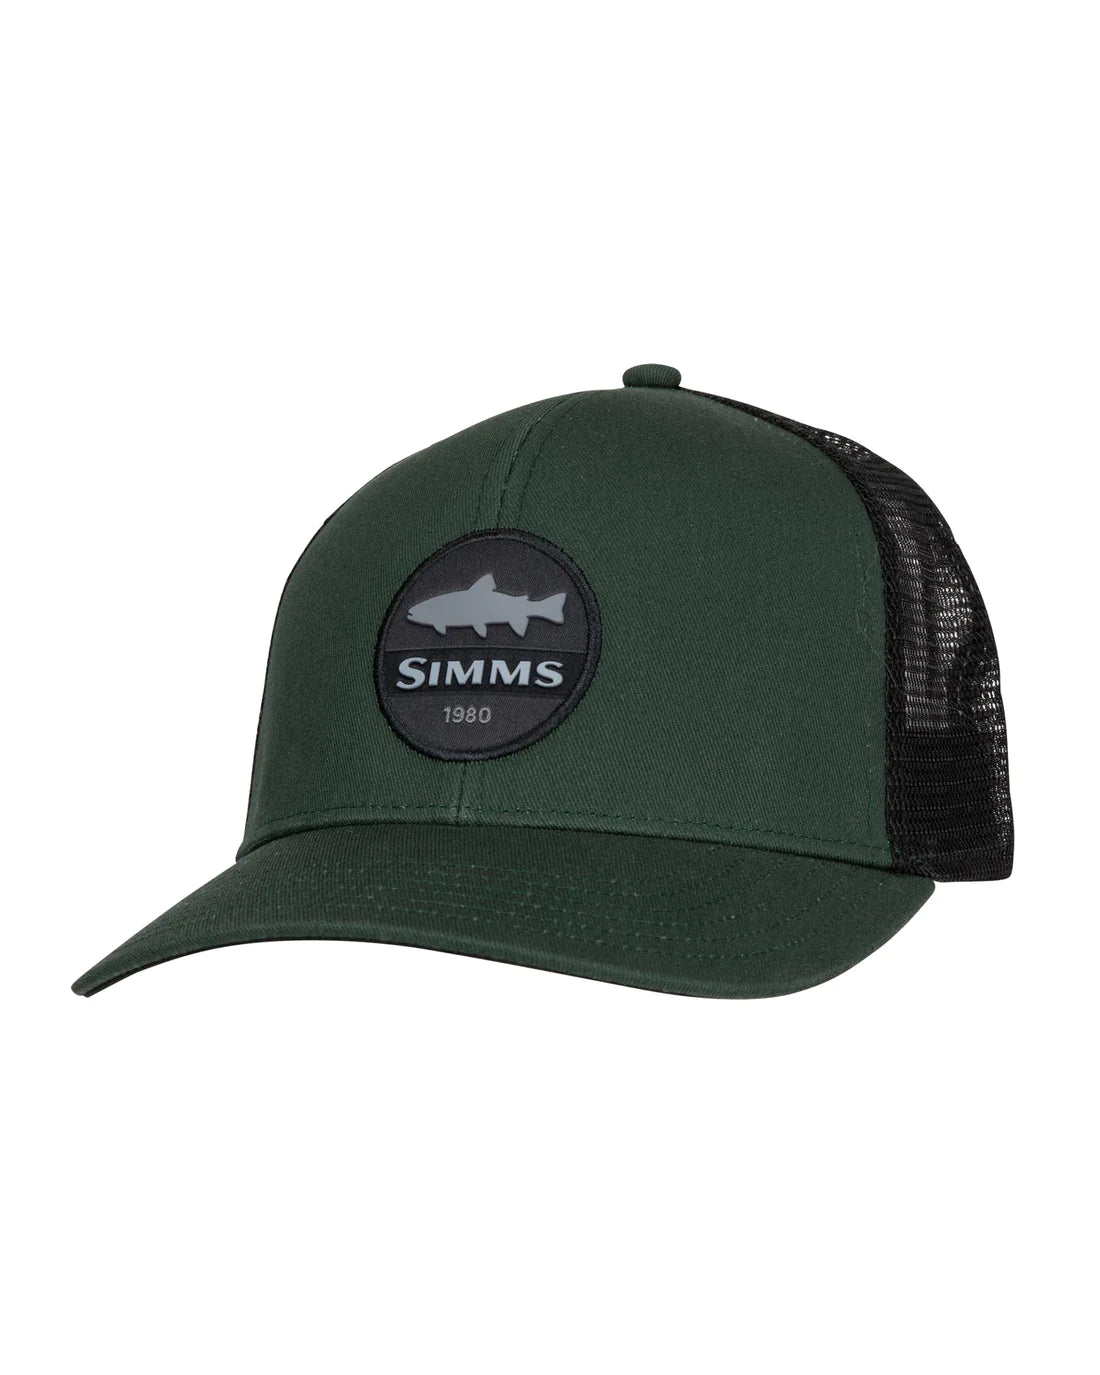 Simms Trout Patch Trucker - OSFM / Foliage - Mansfield Hunting & Fishing - Products to prepare for Corona Virus